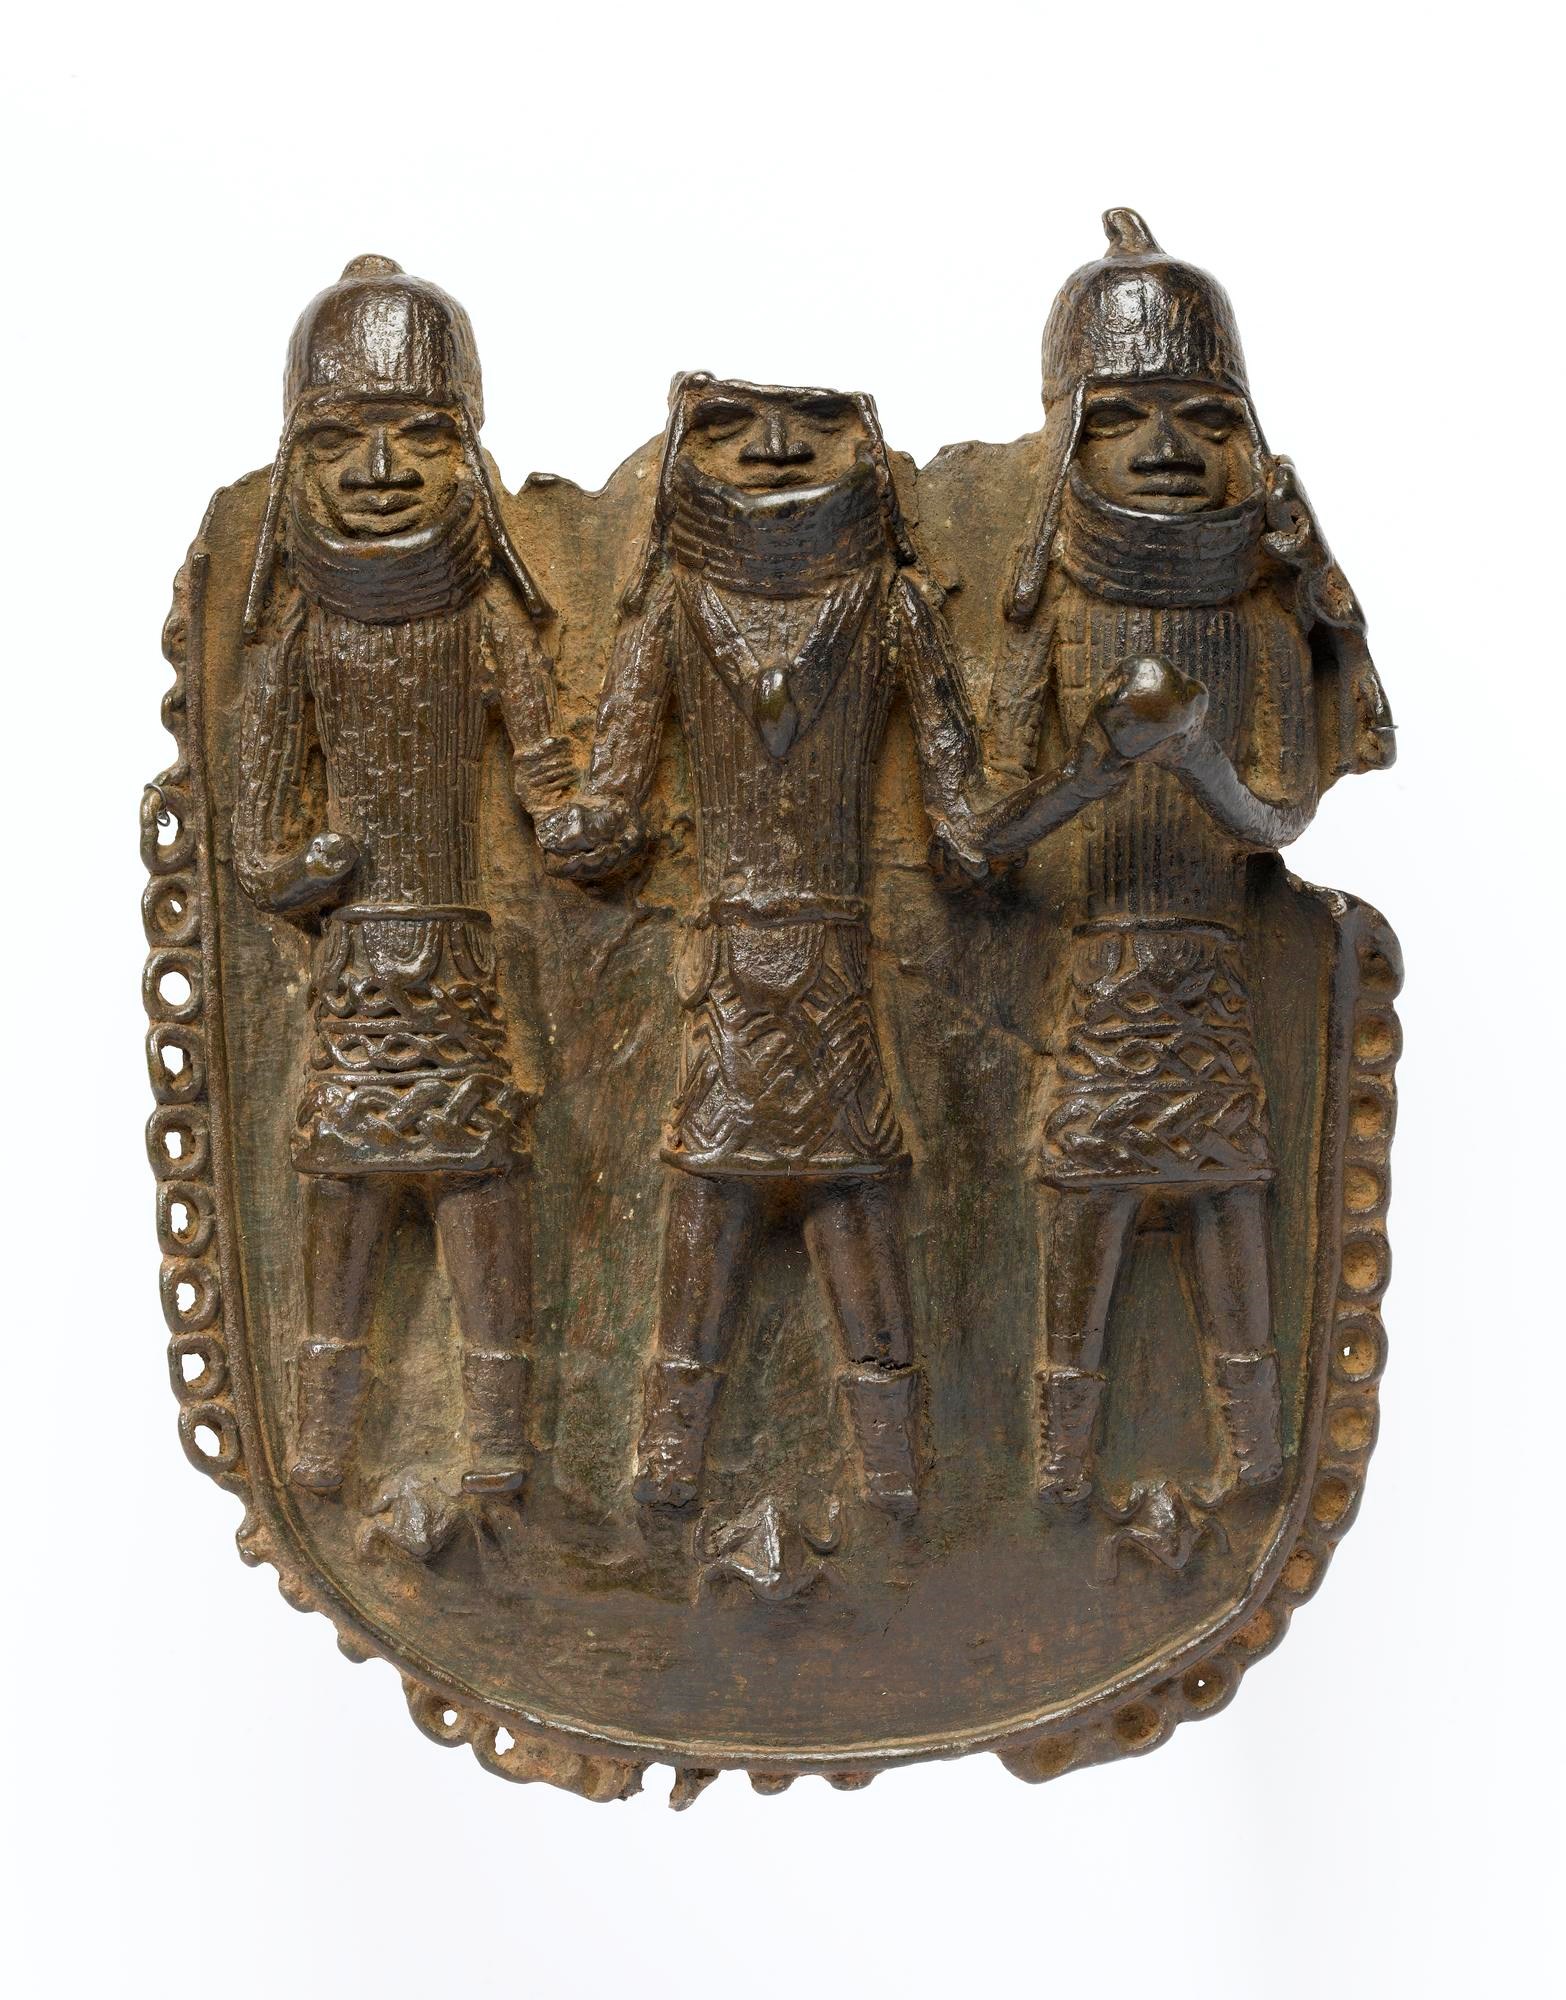 Bronze pendant chipped around the edges. Three figures in armour and heavy helmets stand side by side. The top of the middle figure's head is broken off.